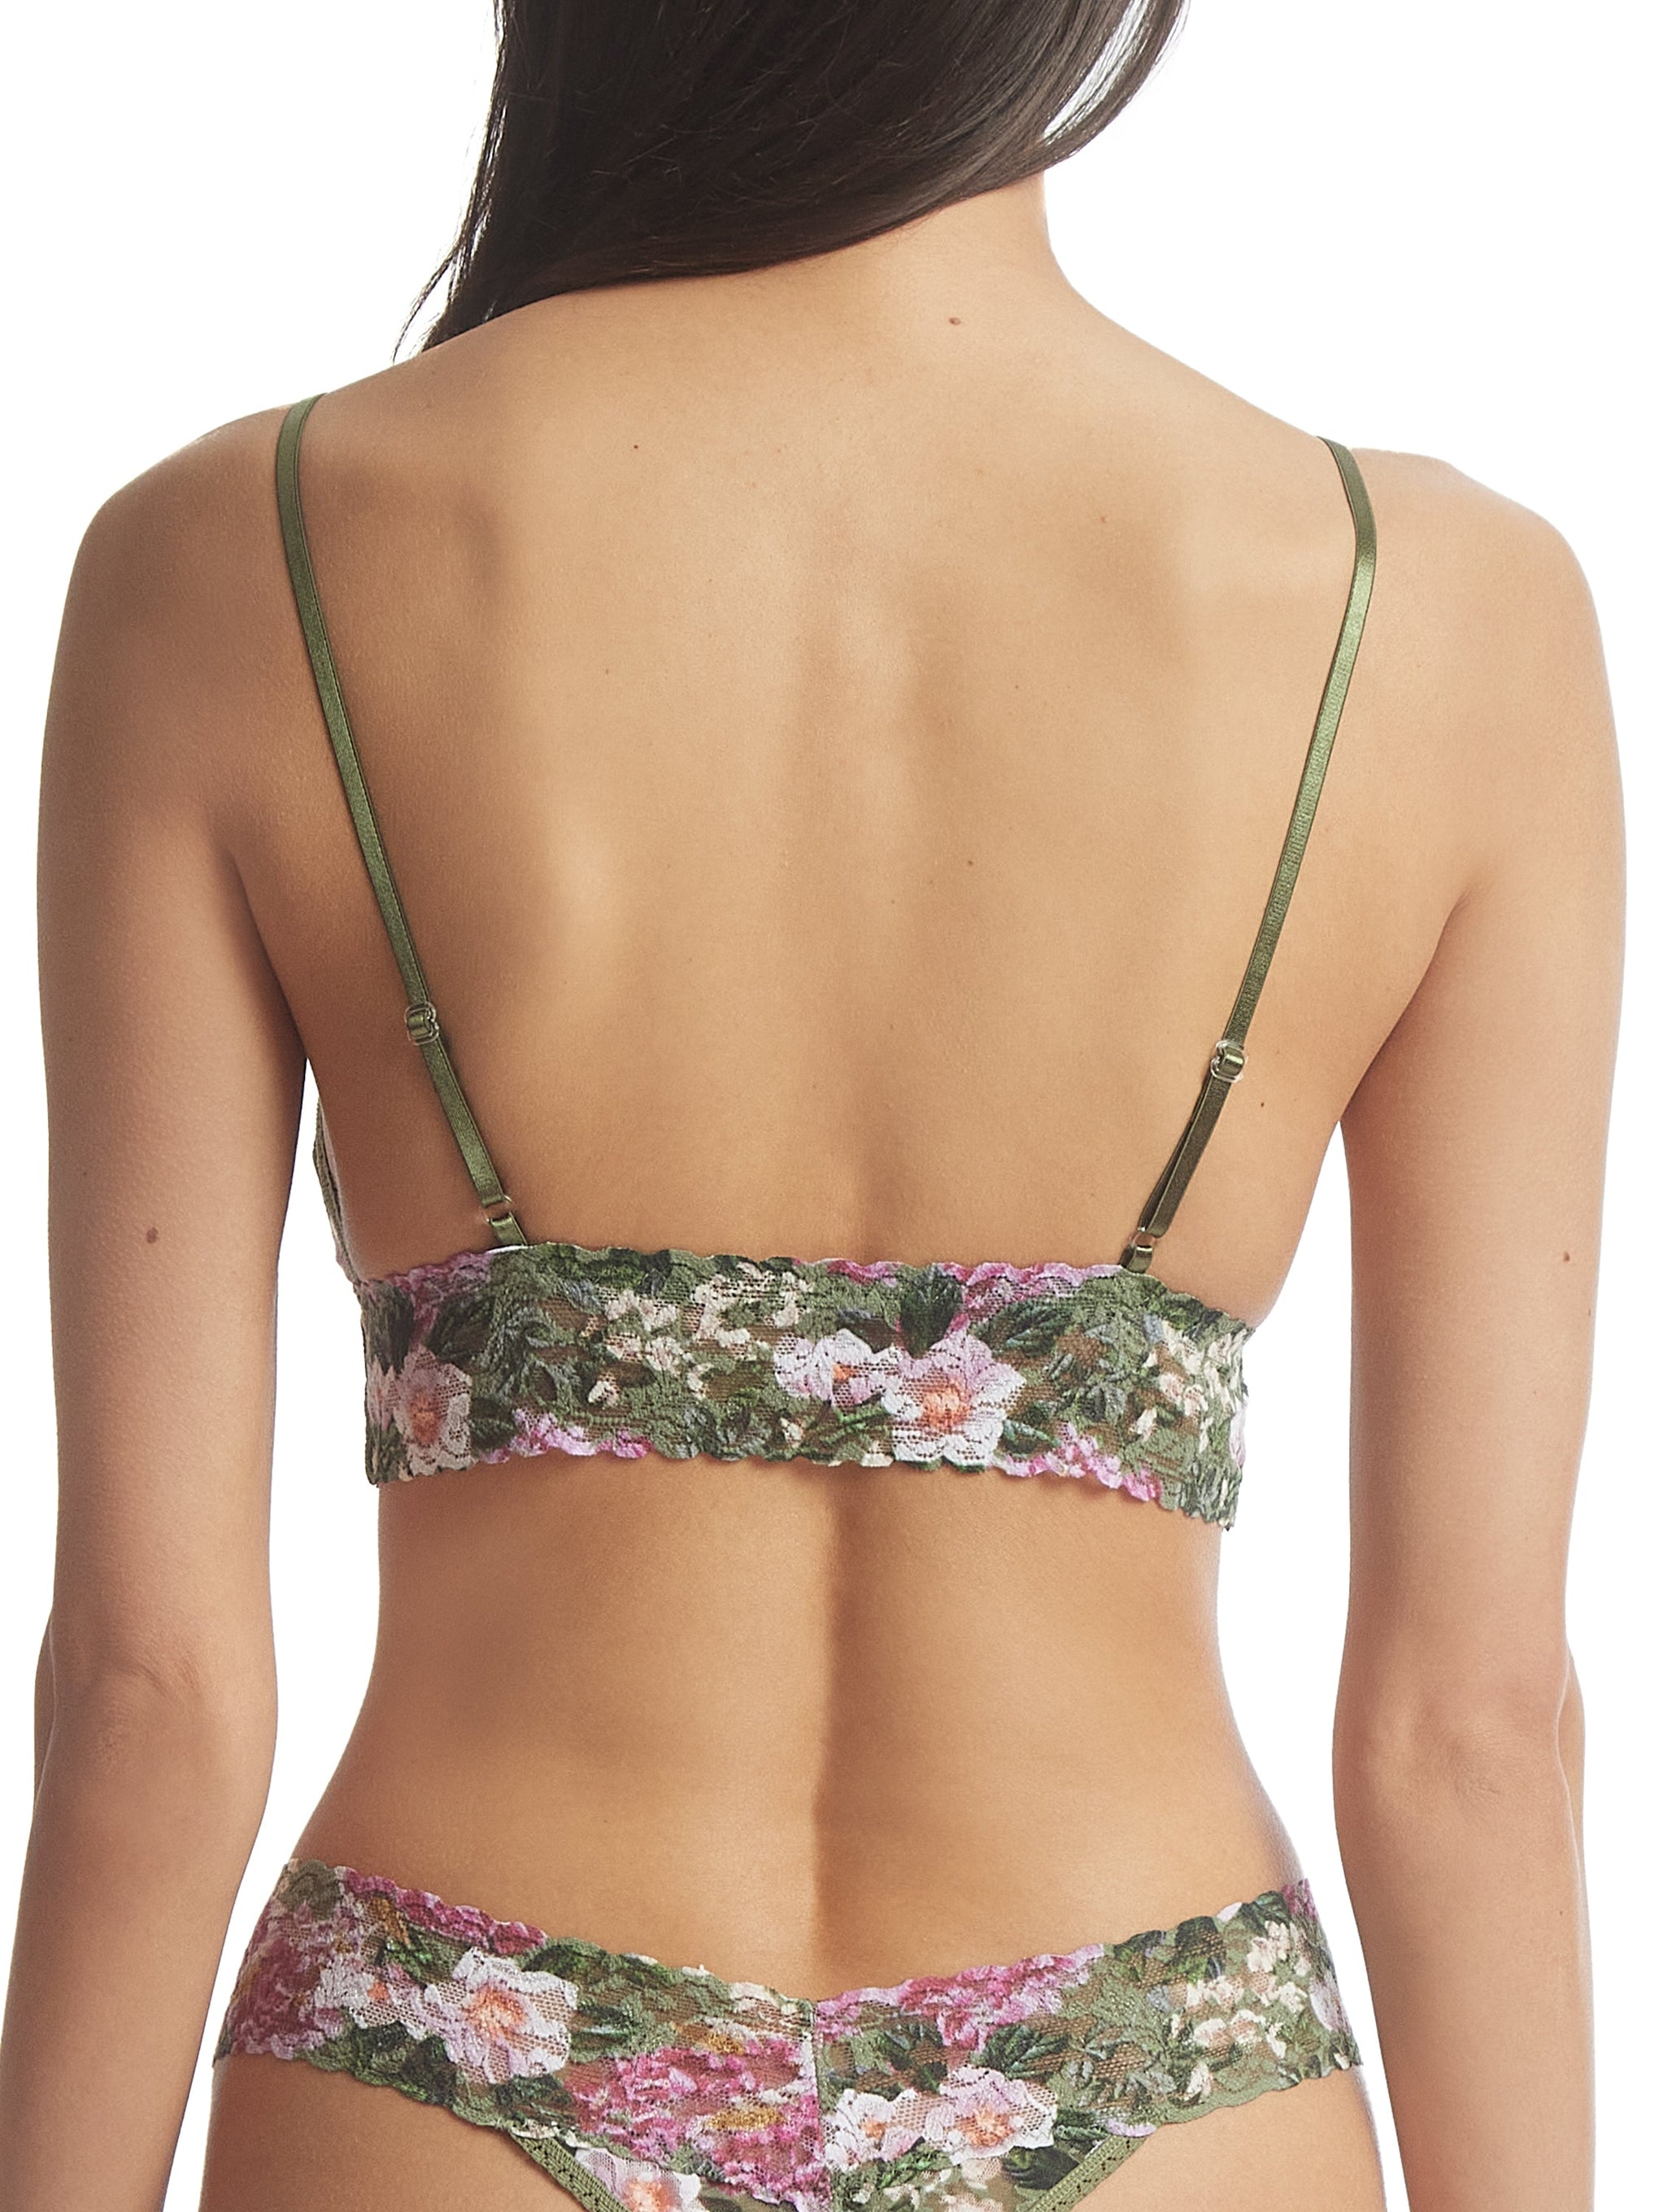 Honeydew Intimates Women's Camellia Lace Bralette, Palm, Small at